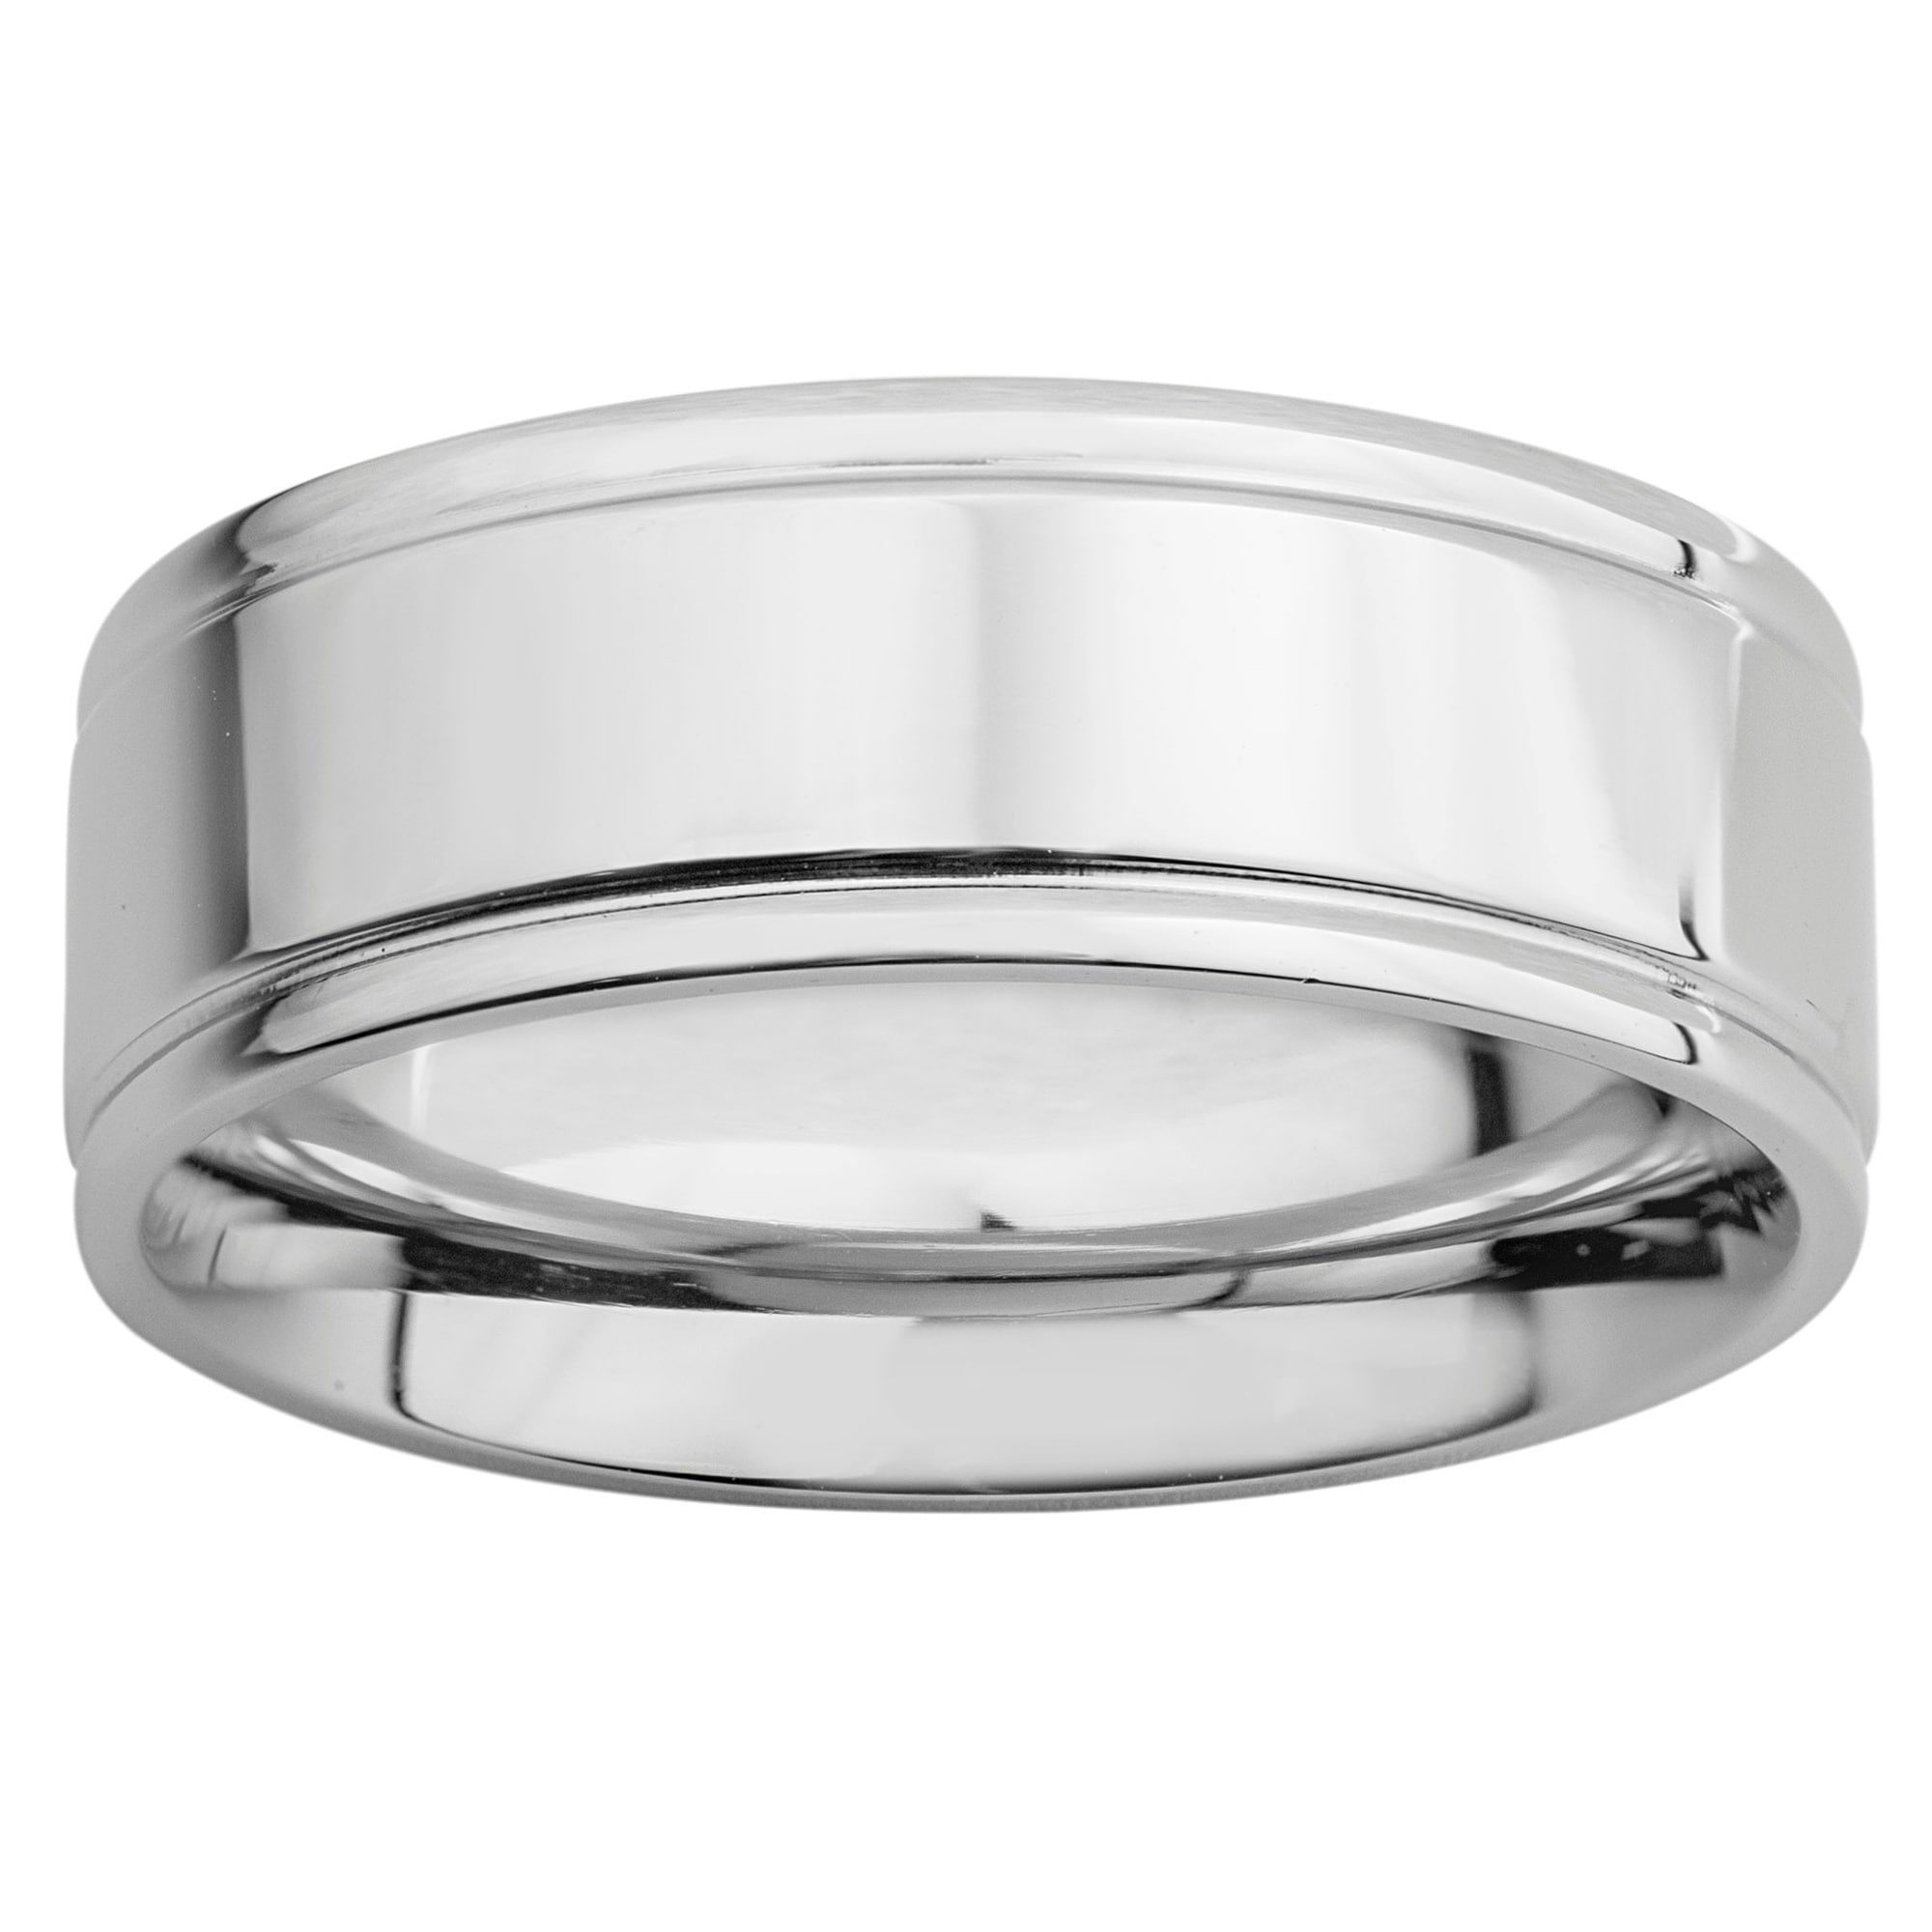 Stainless Steel Grooved 8mm Brushed & Polished Band Best Quality Free Gift Box 